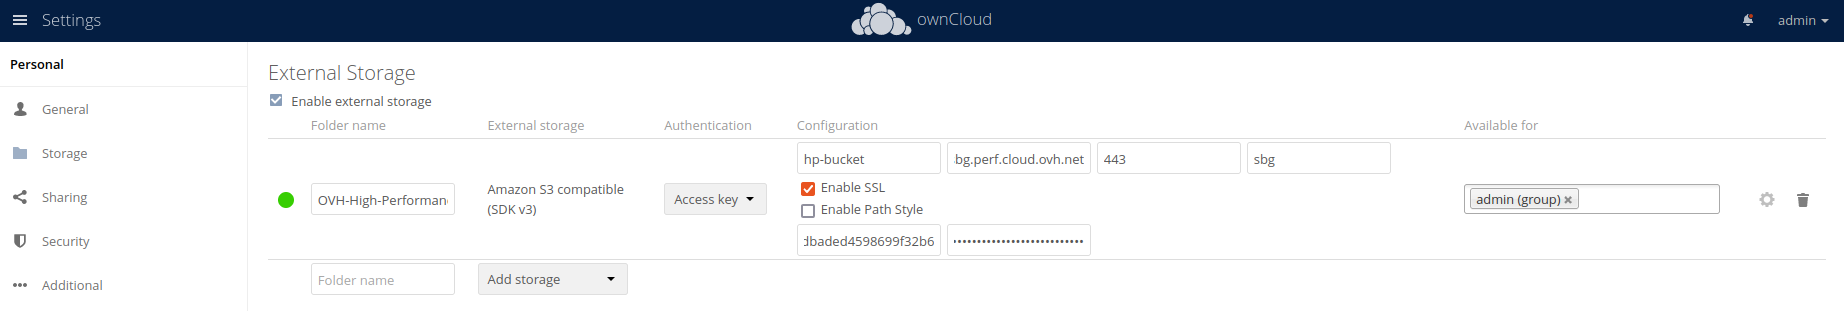 openioowncloud6.png